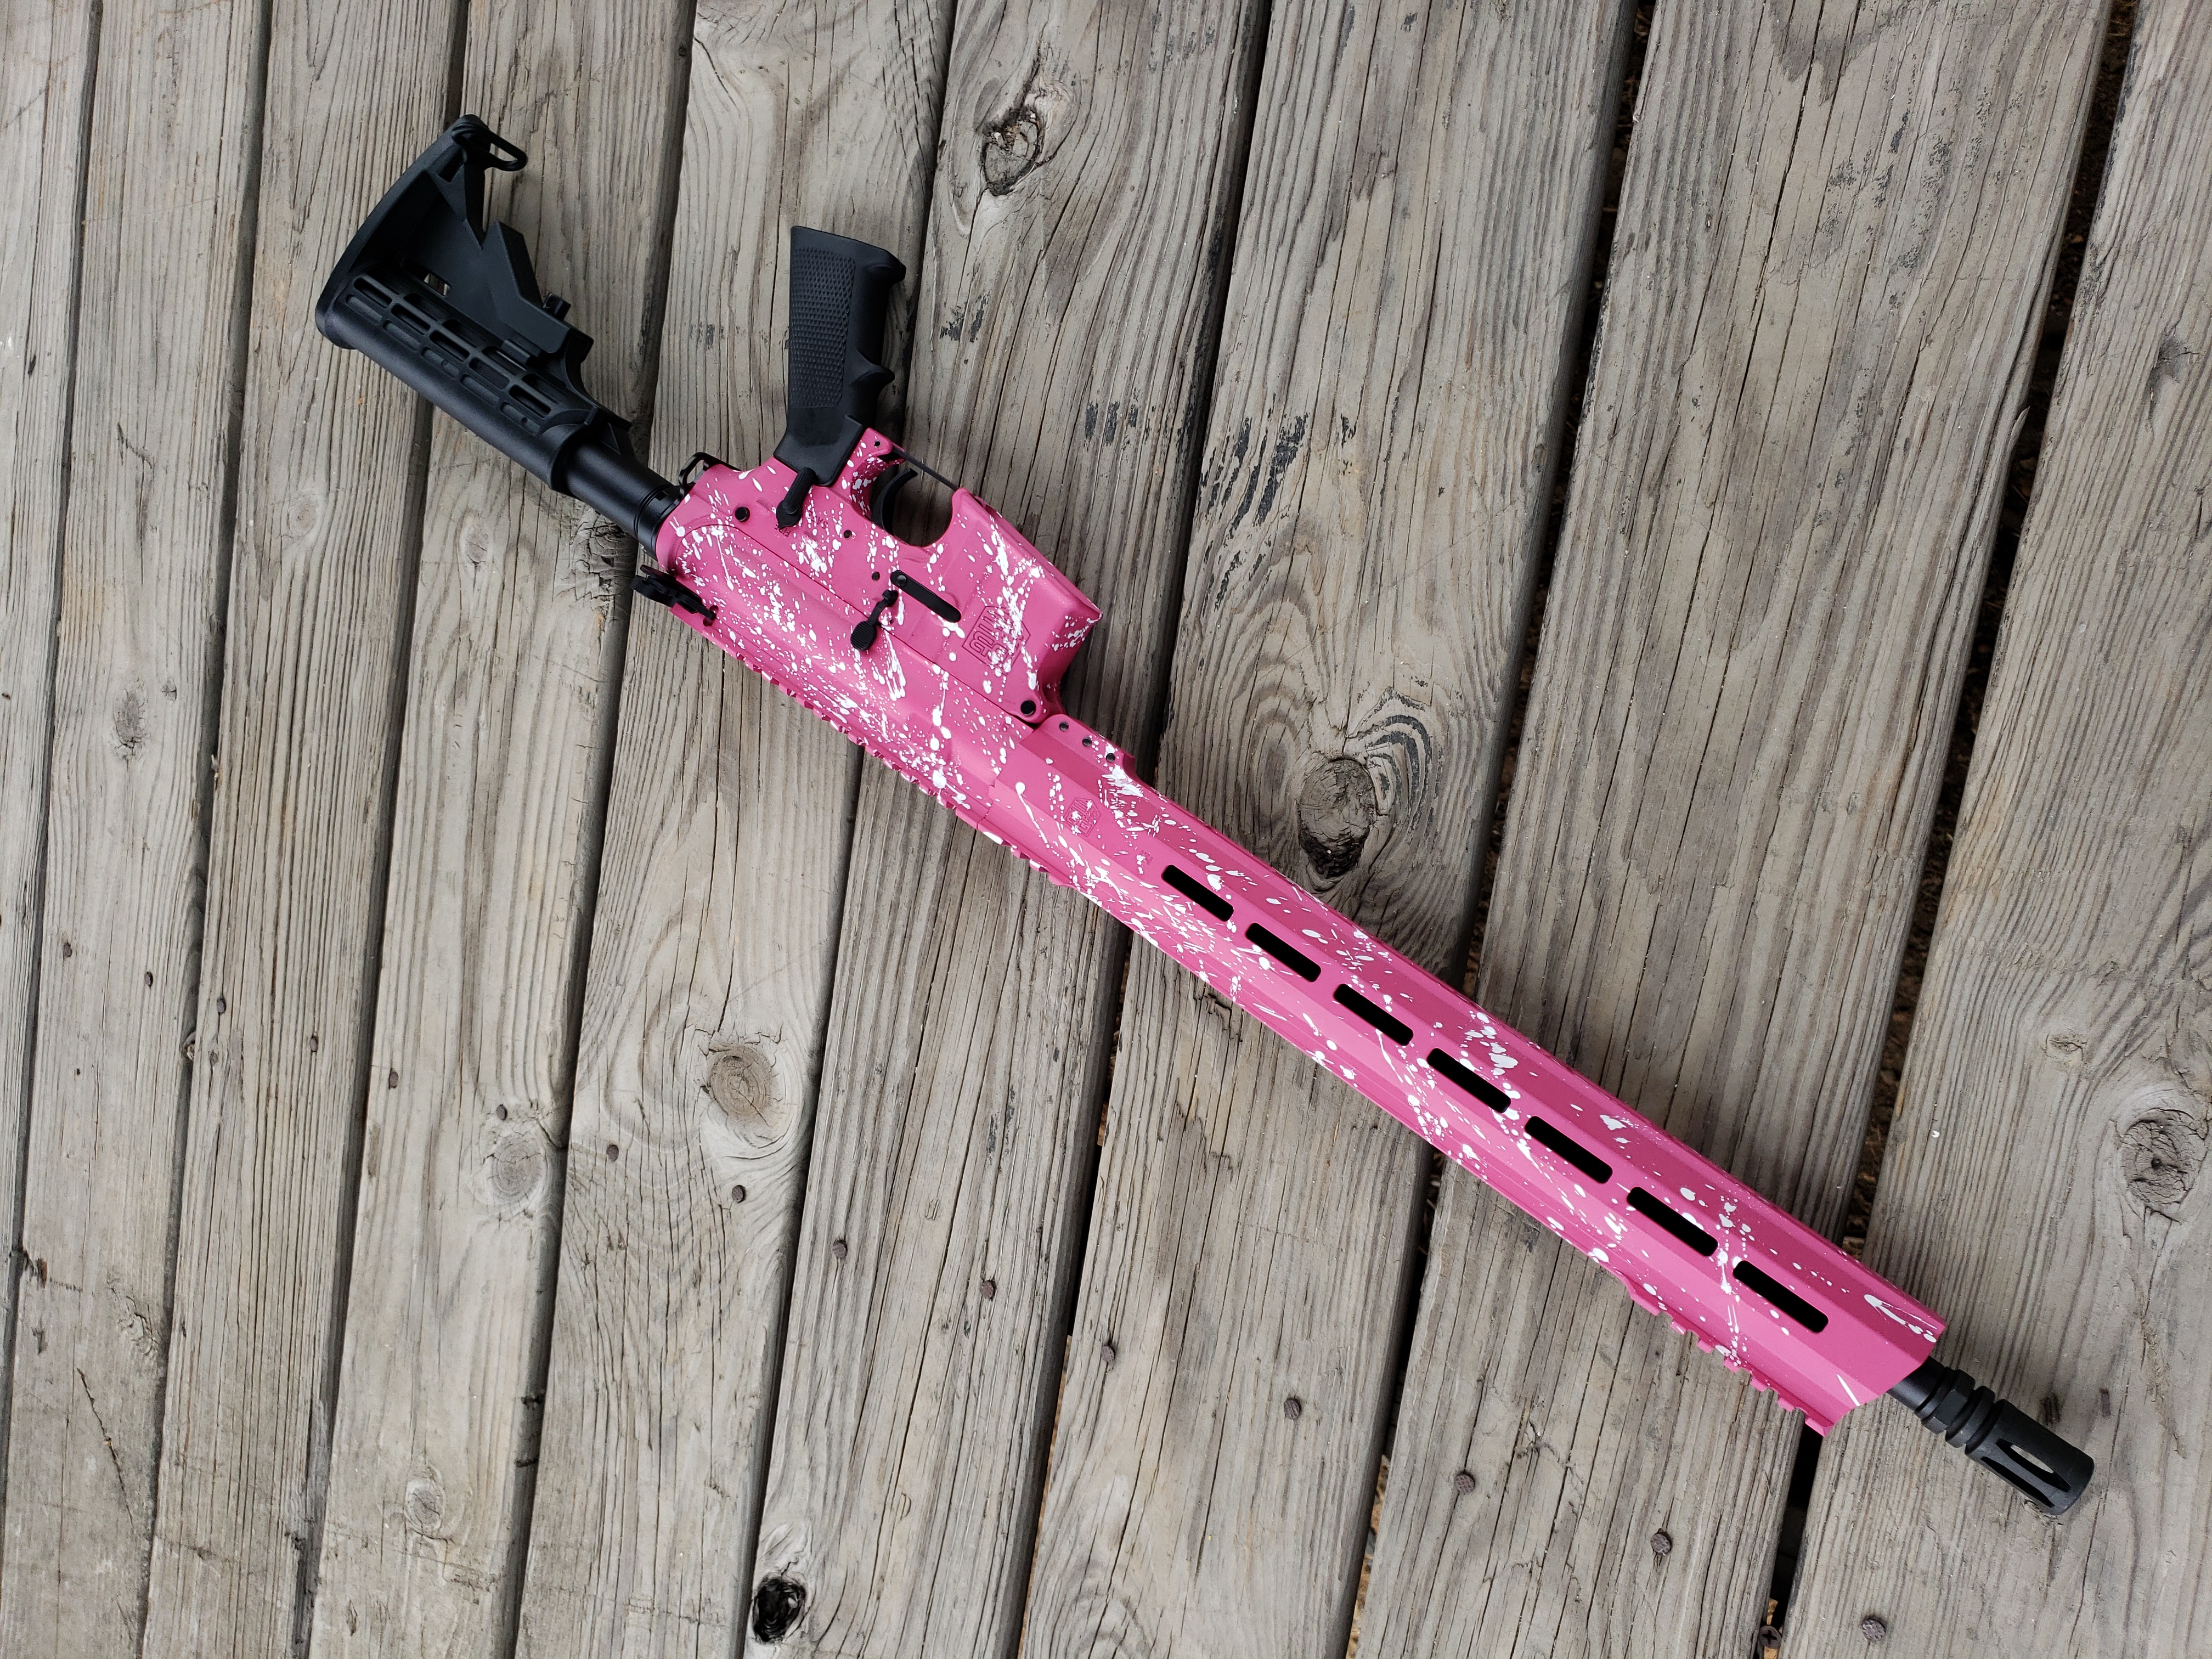 Paint Splatter AR Cerakoted using Sig™ Pink and Stormtrooper White